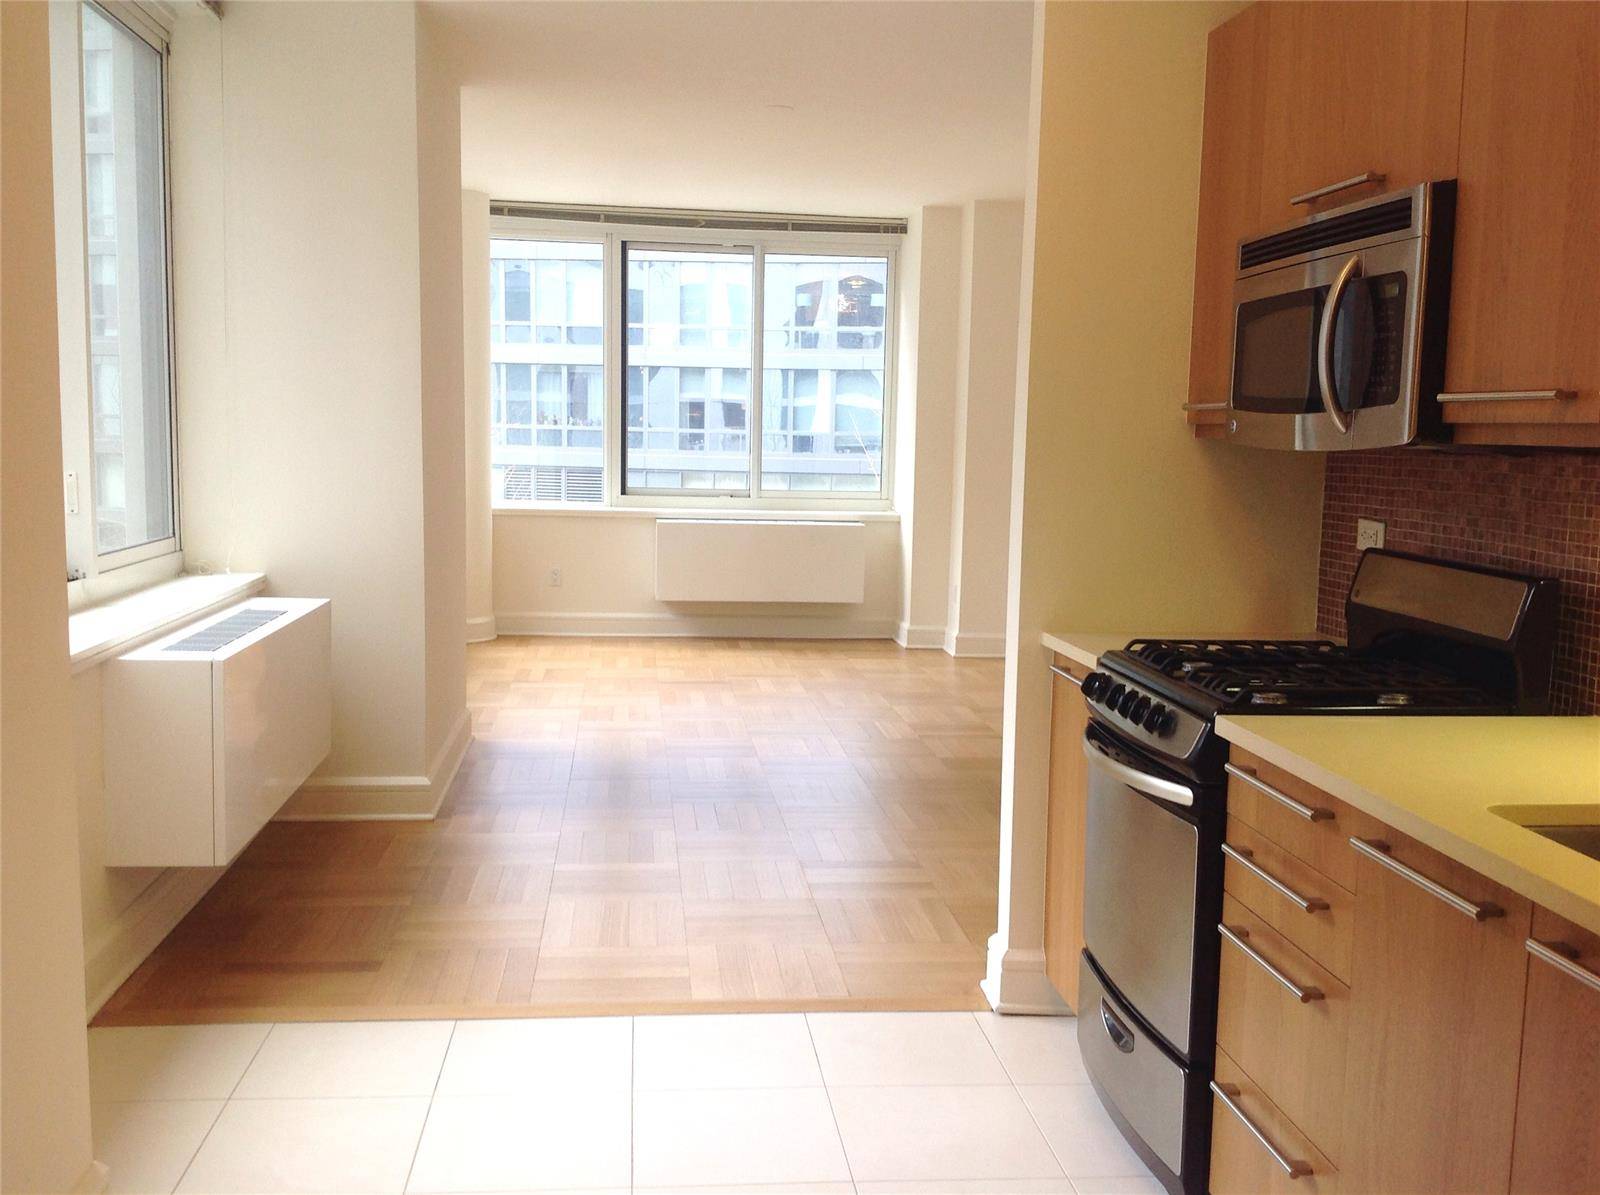 Chic Upper West Side Studio Apartment with 1 Bath featuring a Pool and Garden